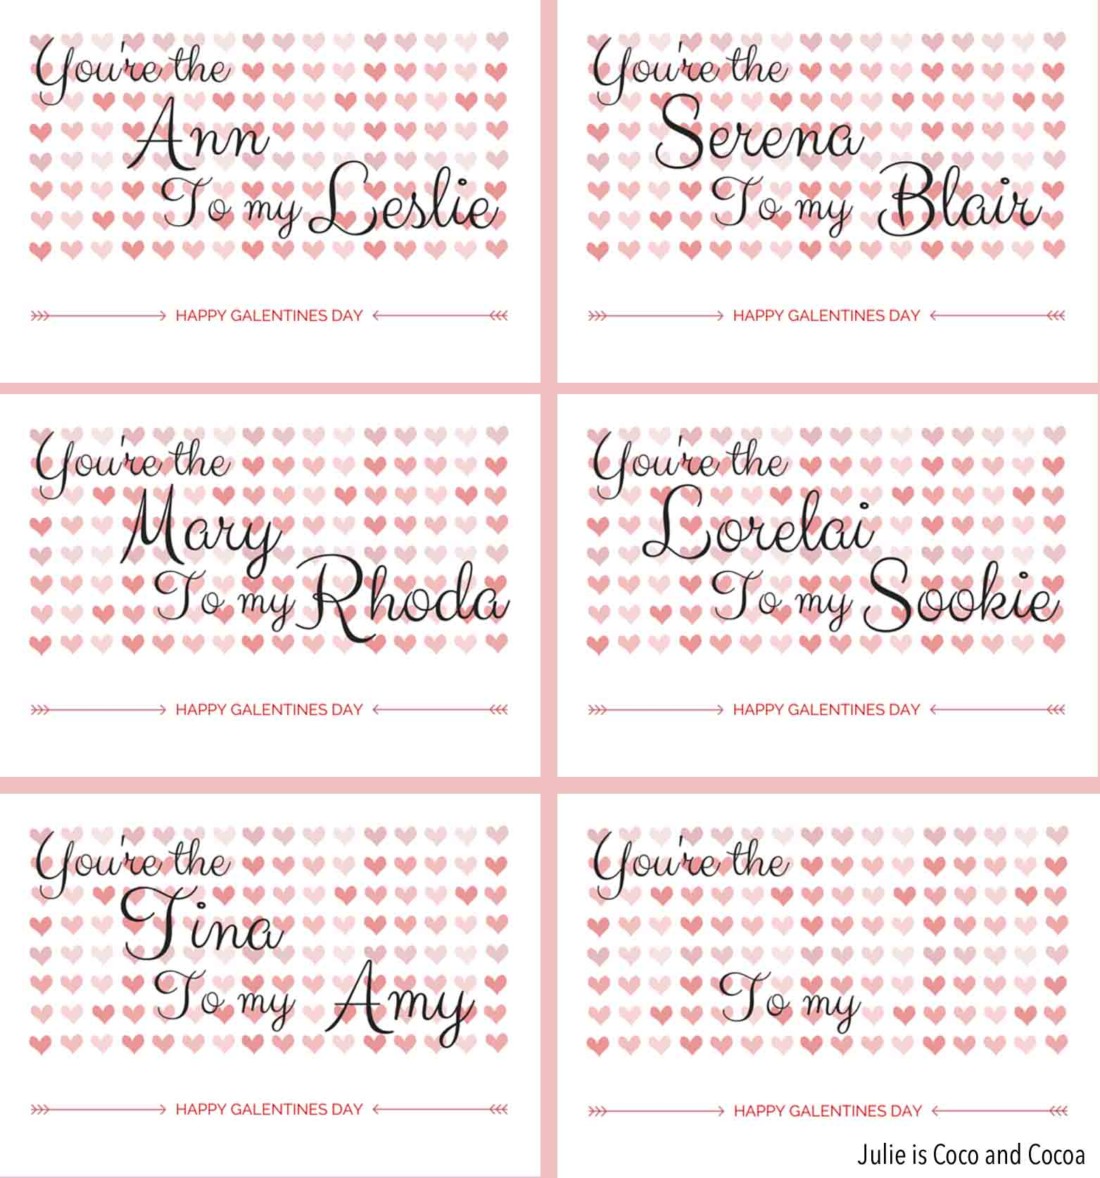 Show your friends you love them! Free Printable Galentines Day Cards